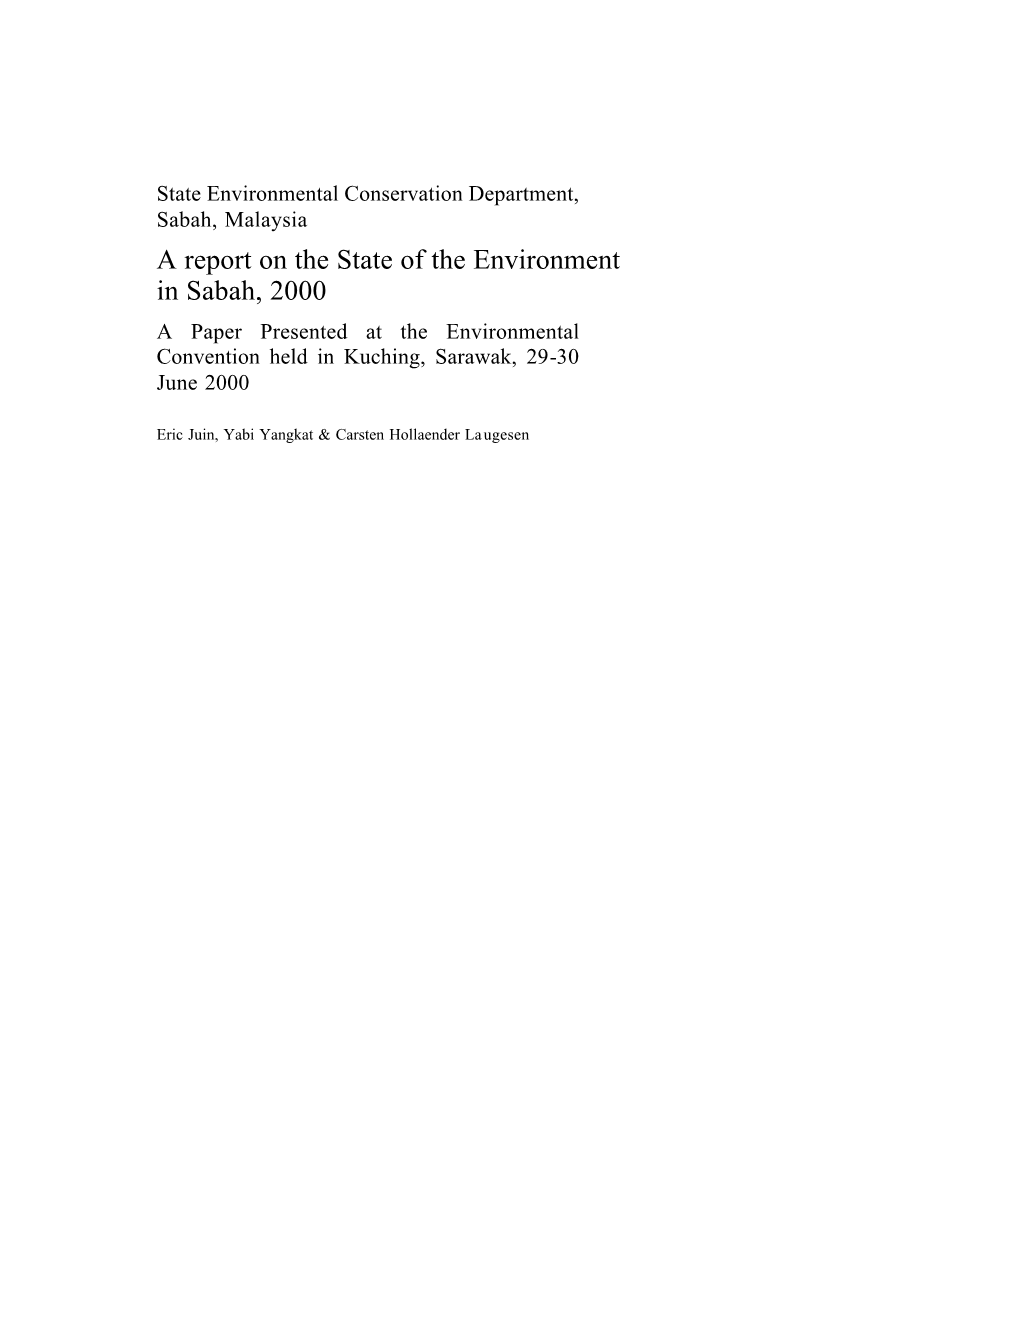 A Report on the State of the Environment in Sabah, 2000 a Paper Presented at the Environmental Convention Held in Kuching, Sarawak, 29-30 June 2000